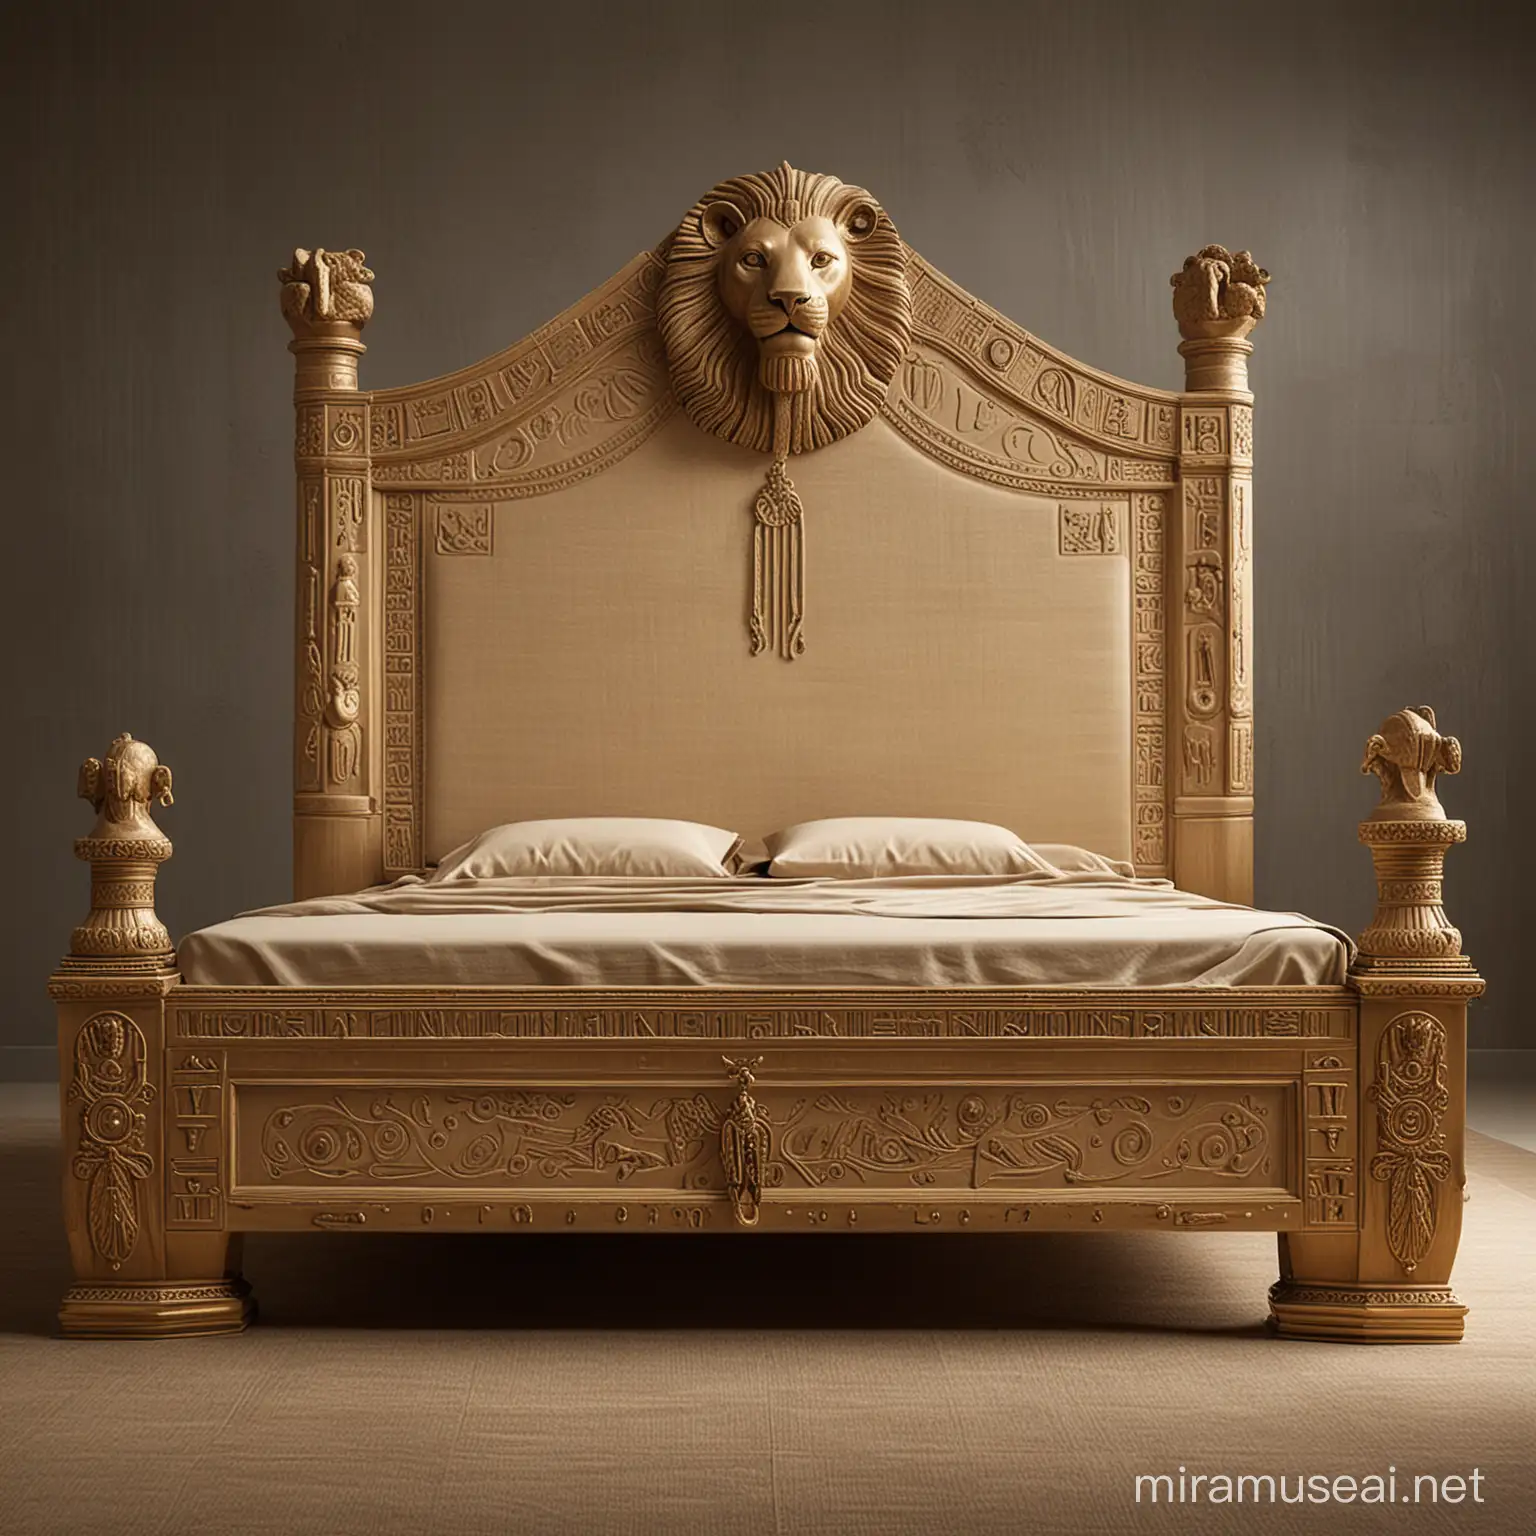 Ancient Egyptian Pharaonic Style Bed with Royal Decorations and Lion Head Legs